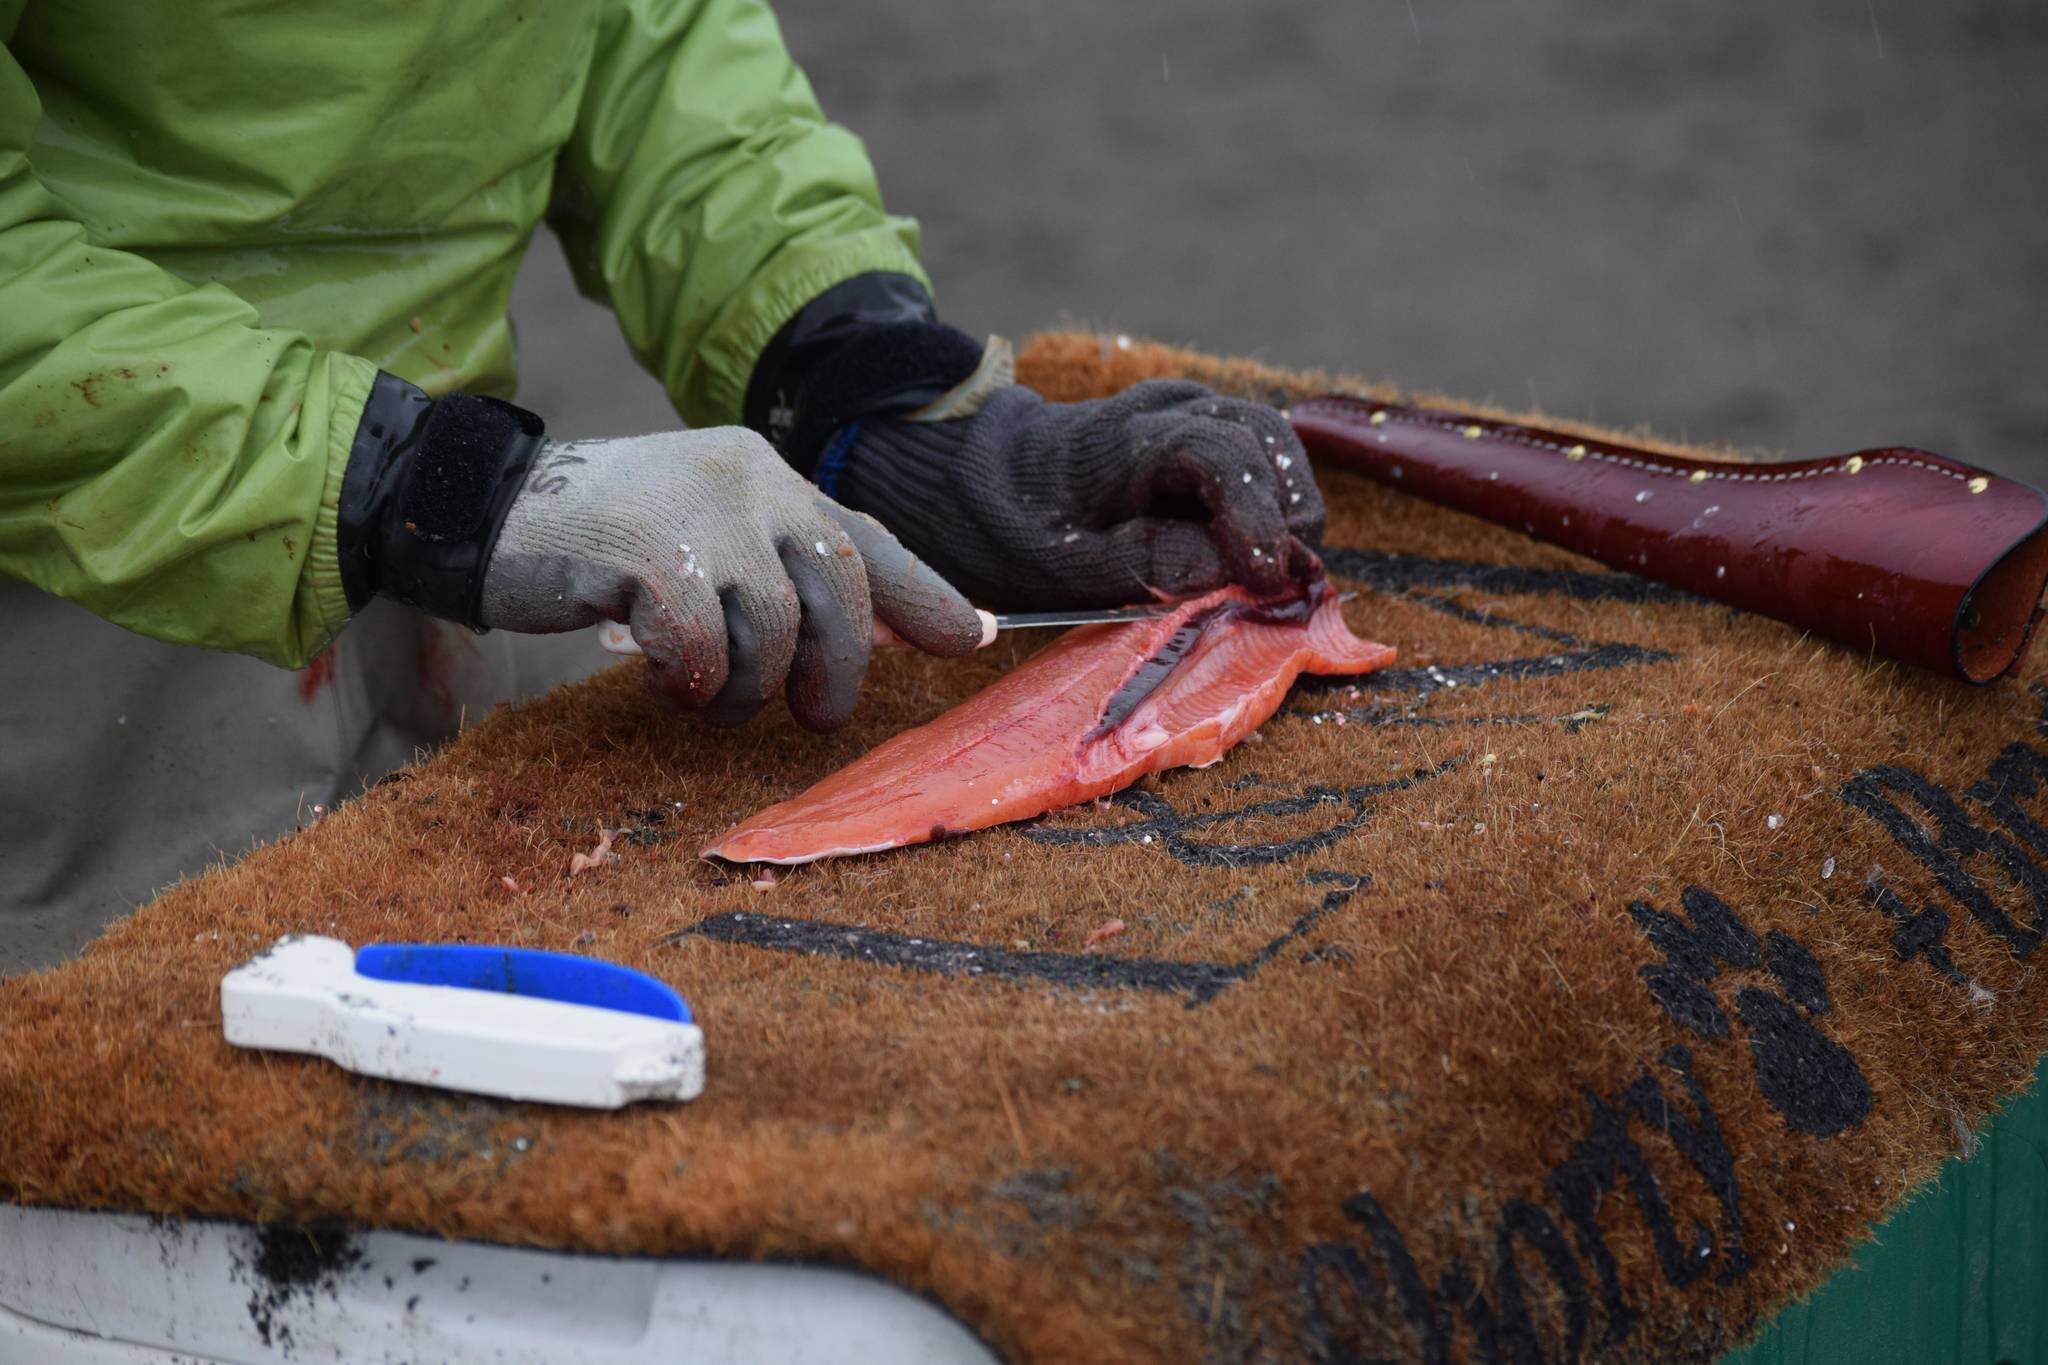 Elizabeth Stergio fillets a salmon after dipnetting on North Kenai Beach on Saturday, July 10, 2021. (Camille Botello/Peninsula Clarion)